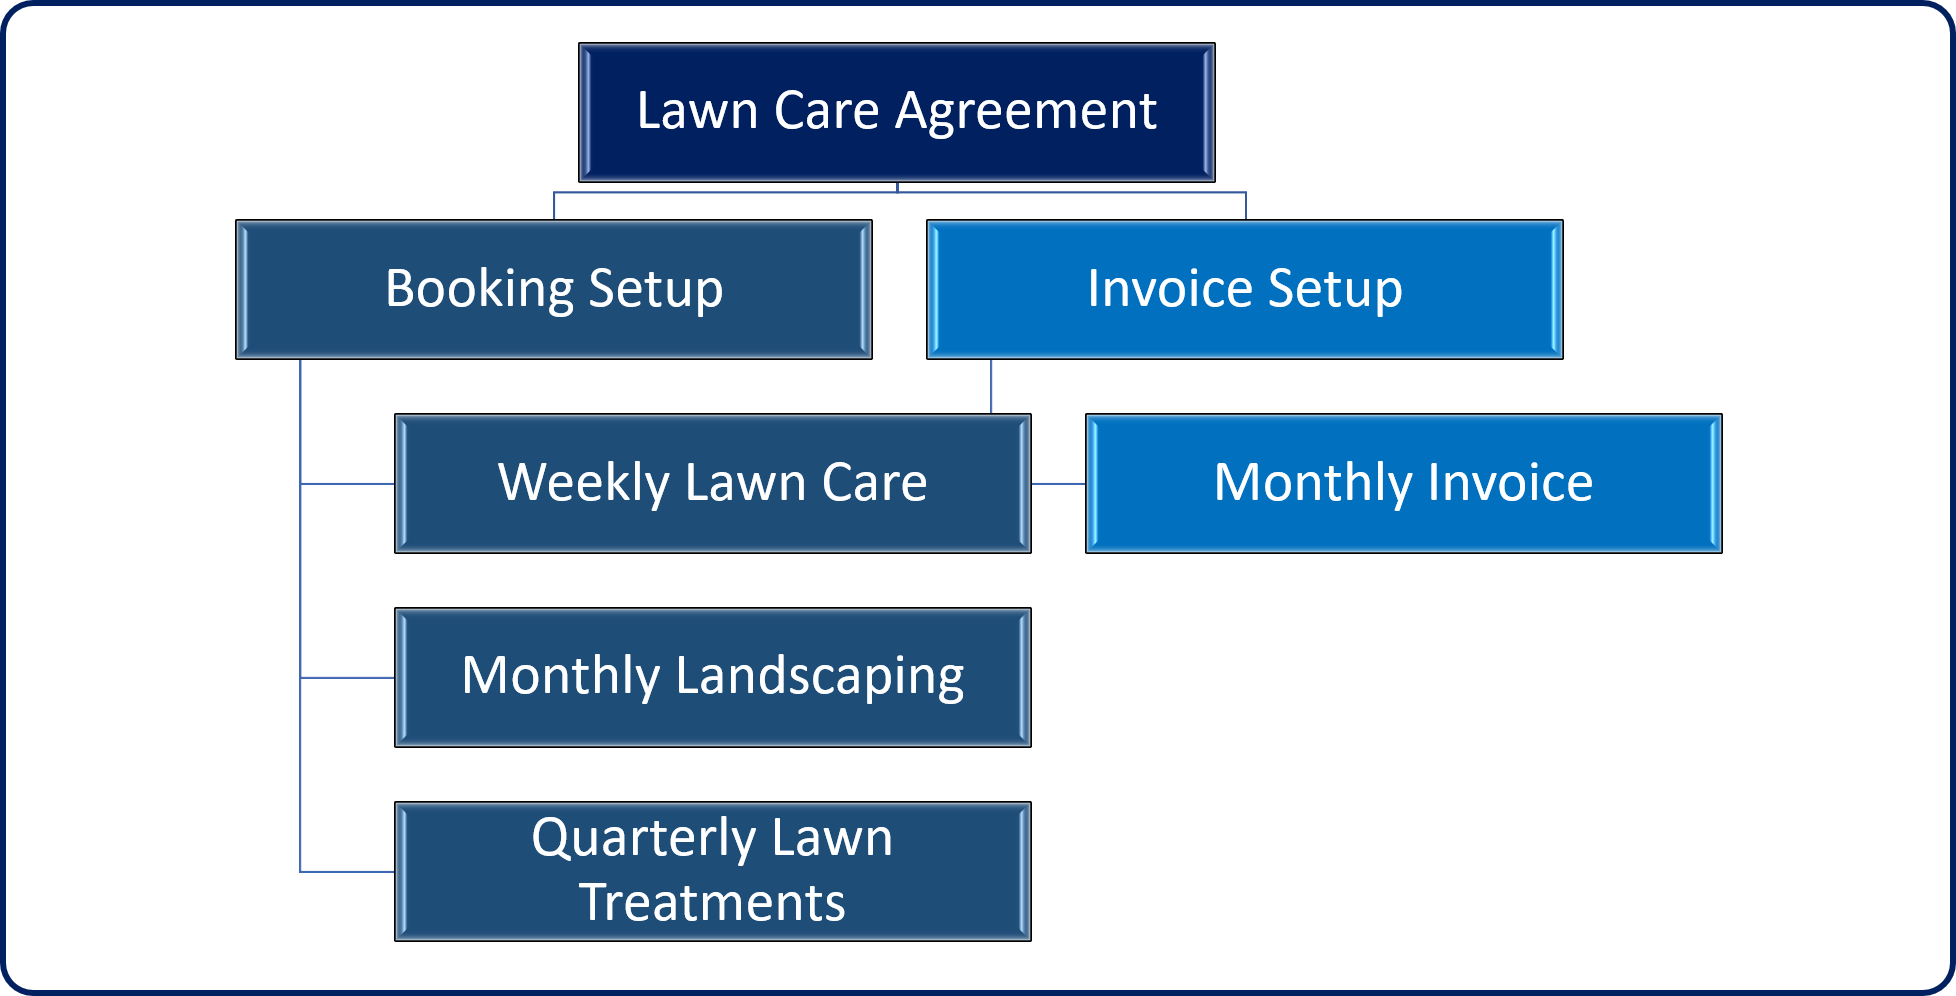 Diagram of Agreement with Booking Setup and Invoice Setup.